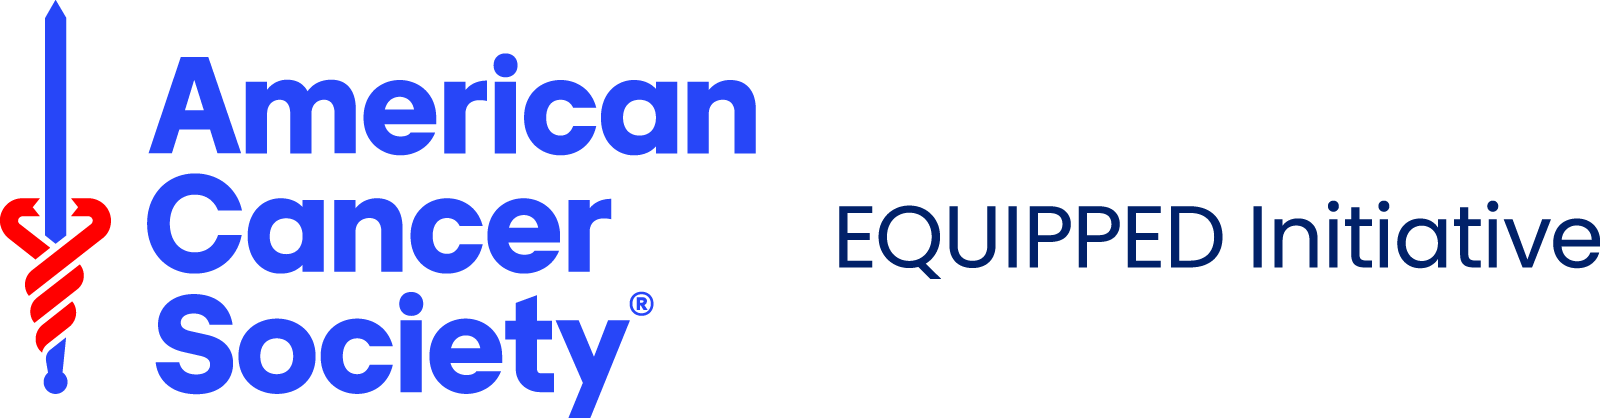 American Cancer Society Logo and Equipped Initiative Logo